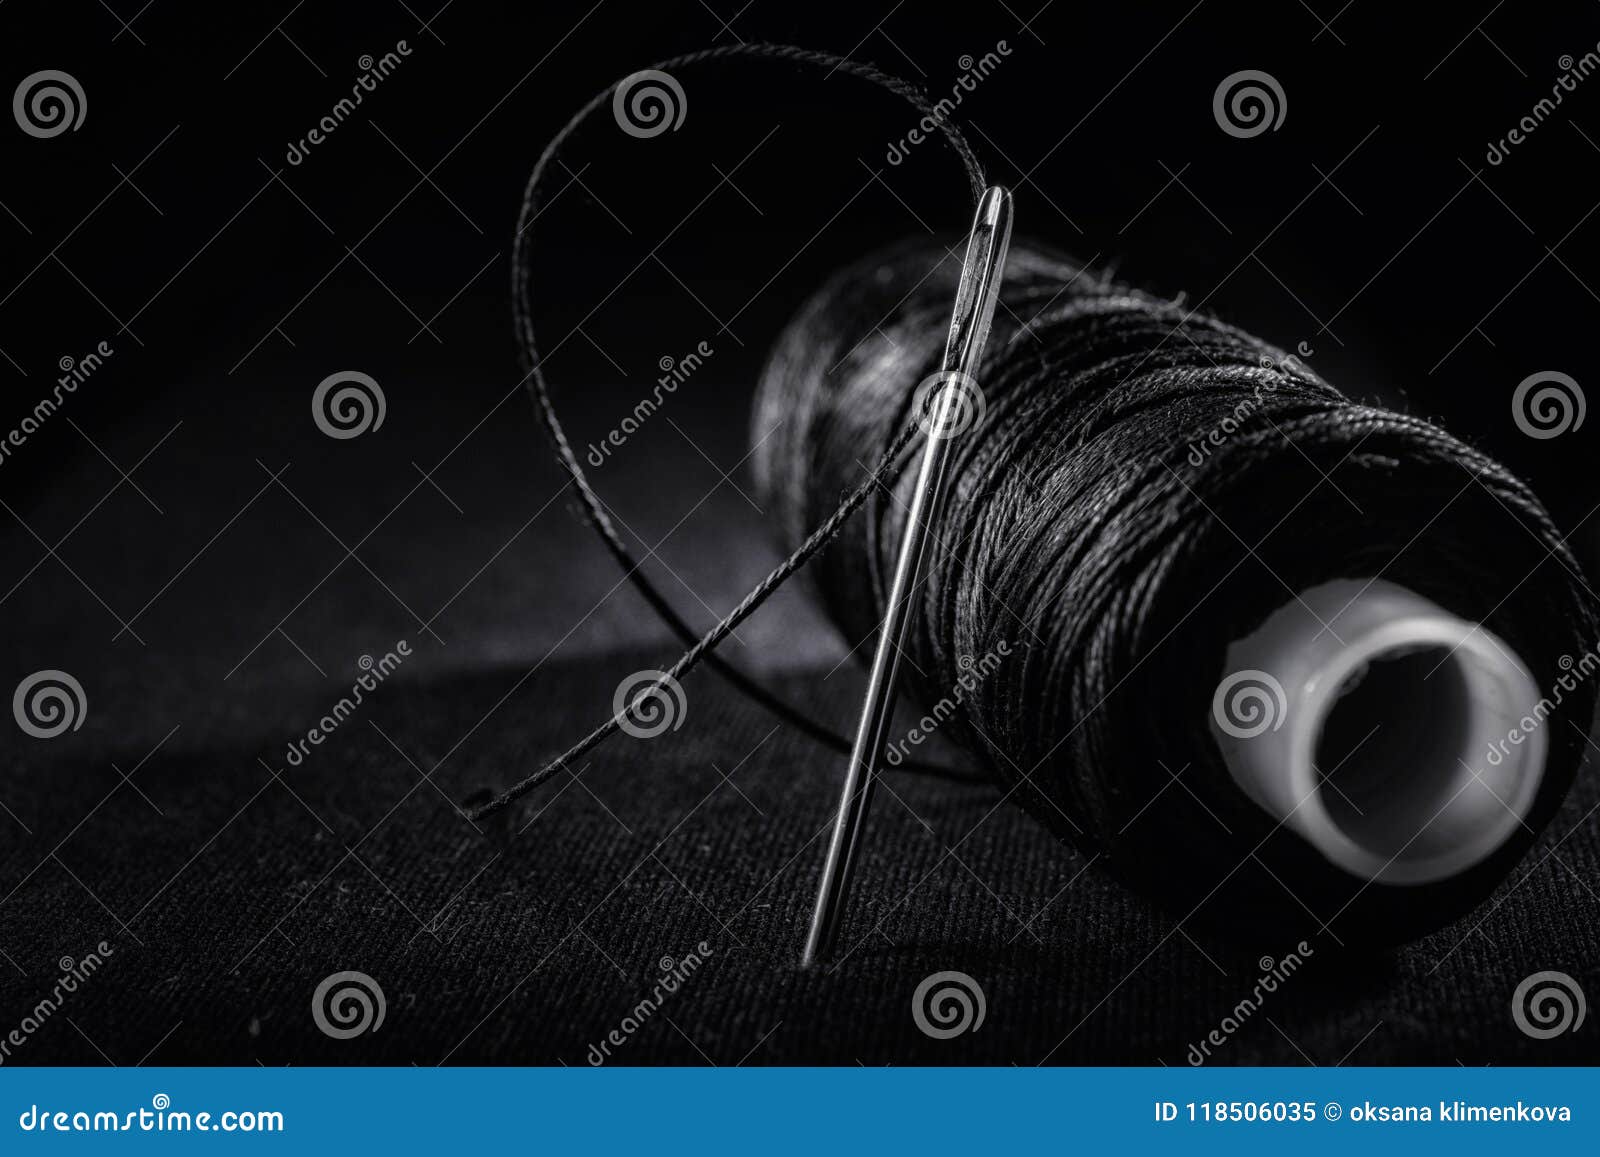 Black Thread Reel with a Needle Stock Photo - Image of object